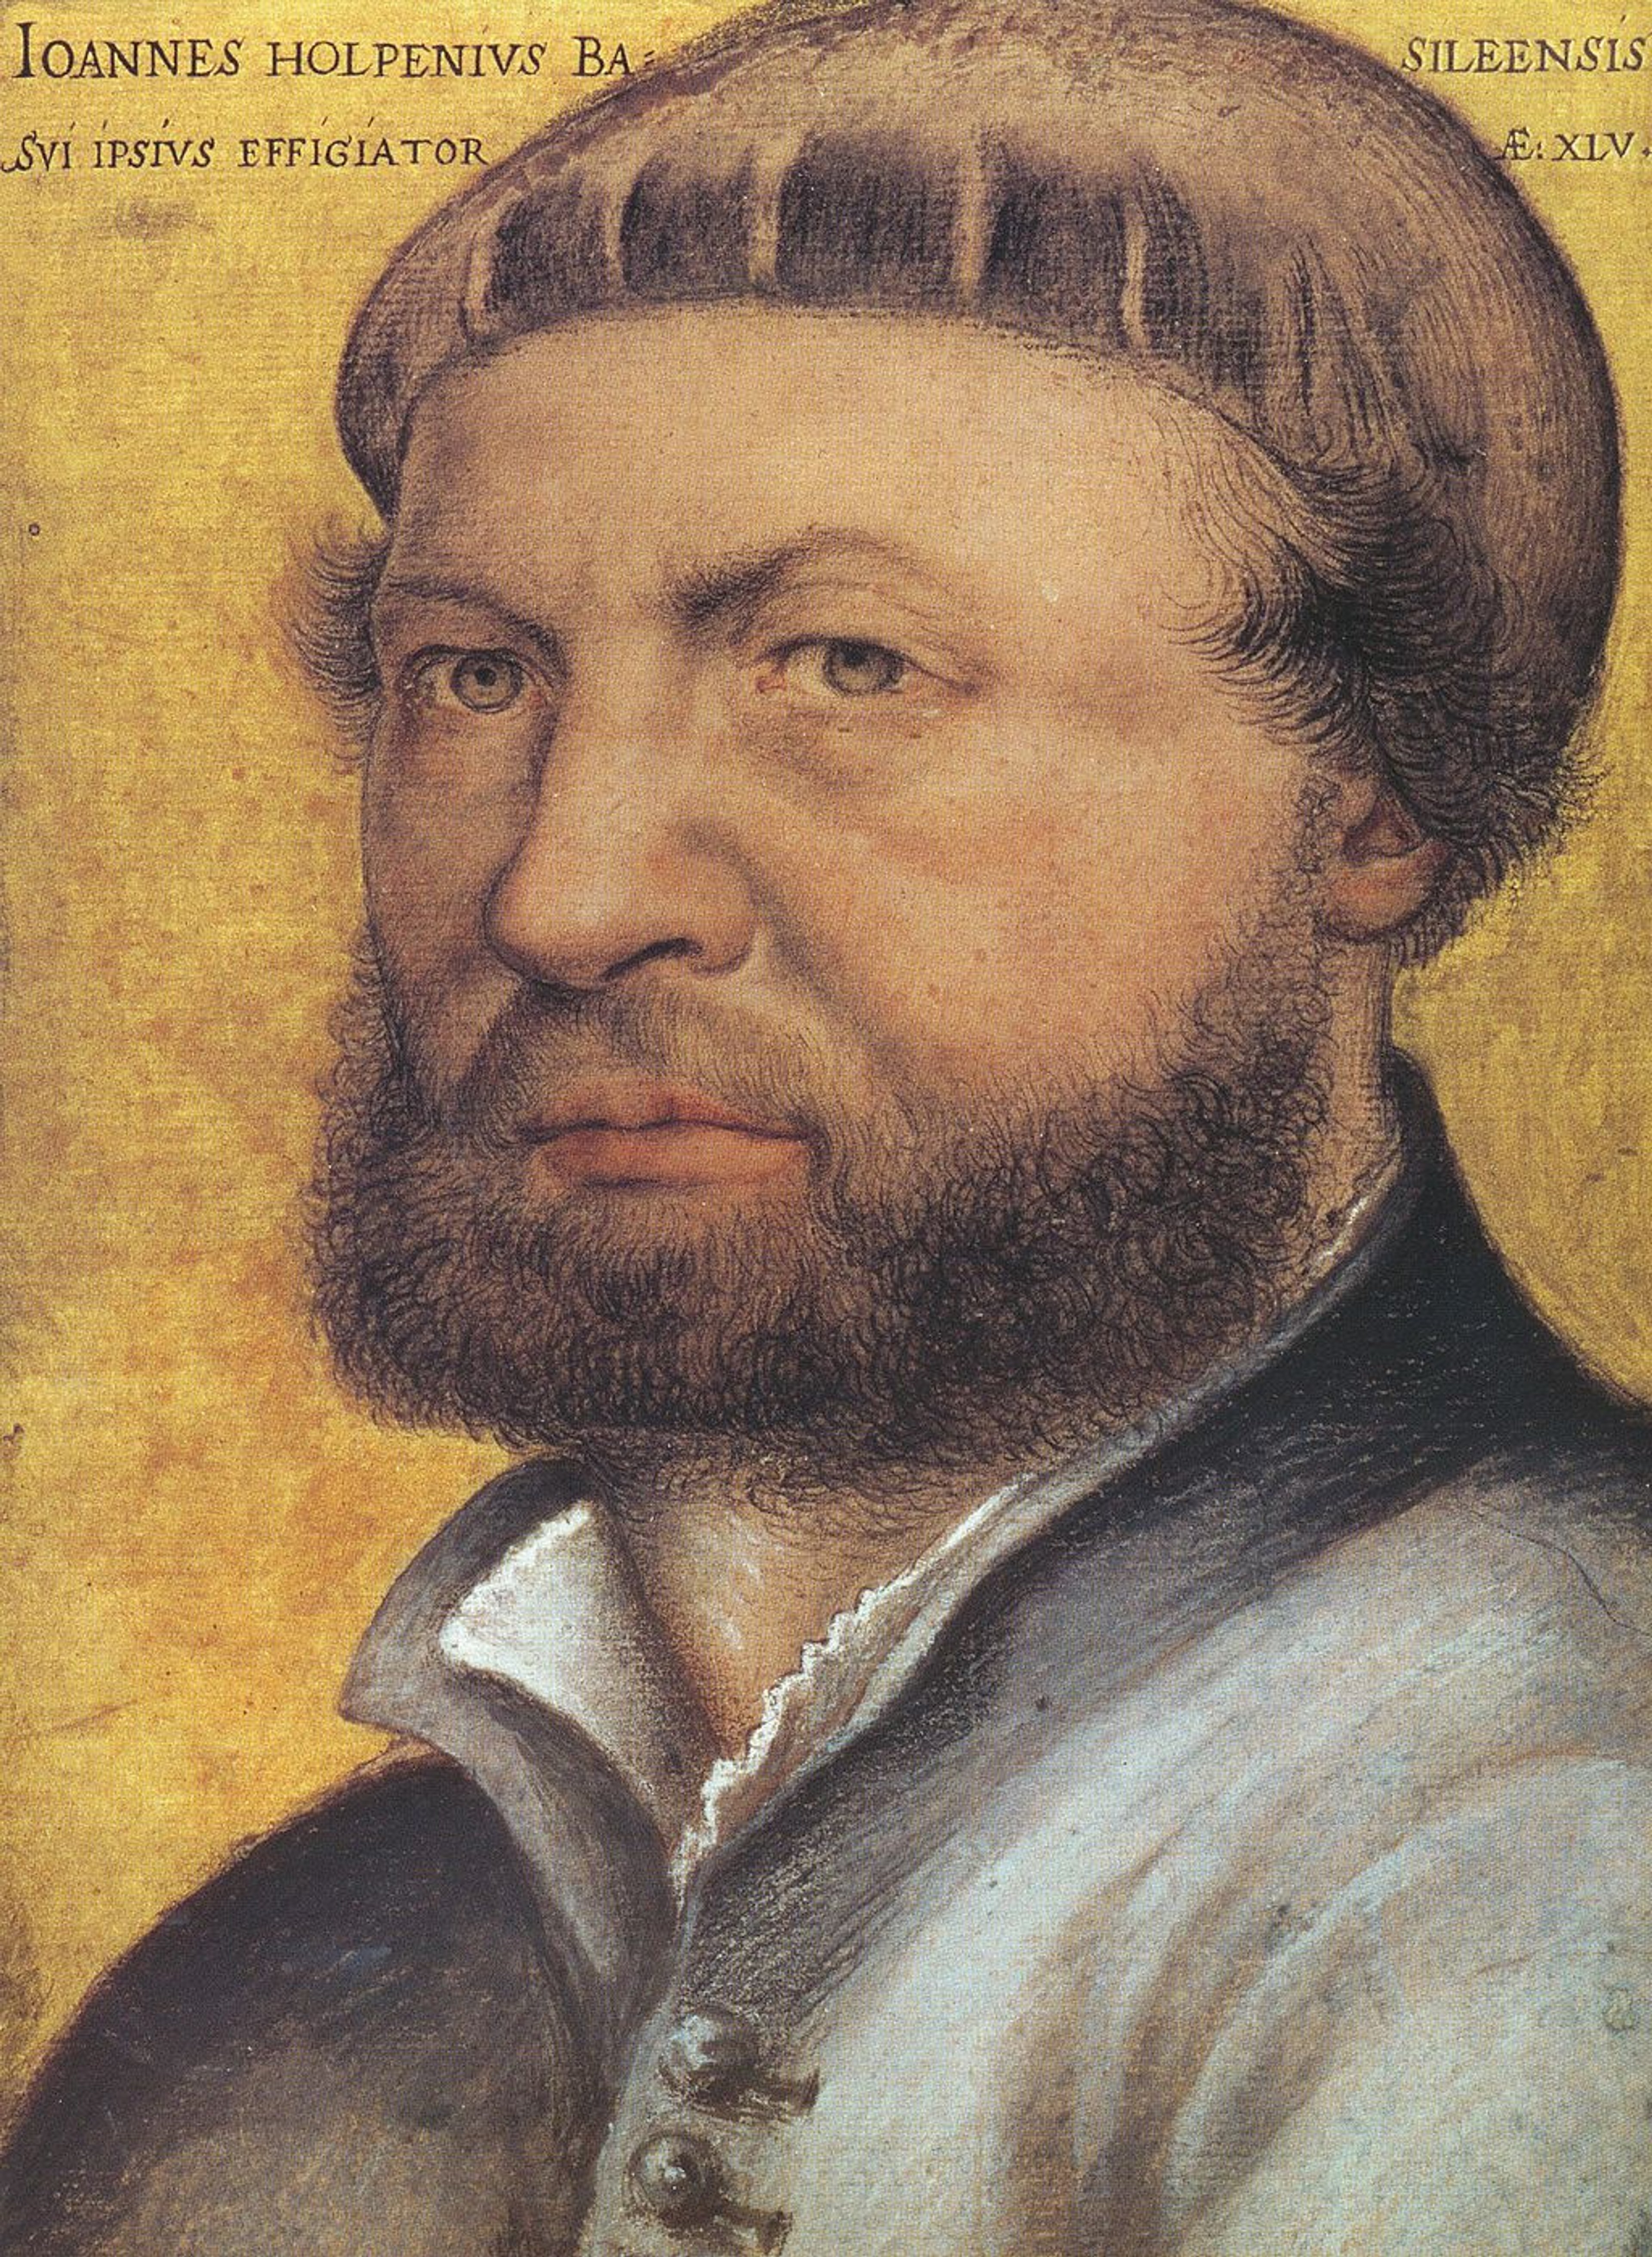 Colourful portrait of Hans Holbein, a man with a beard and wearing a headdress.